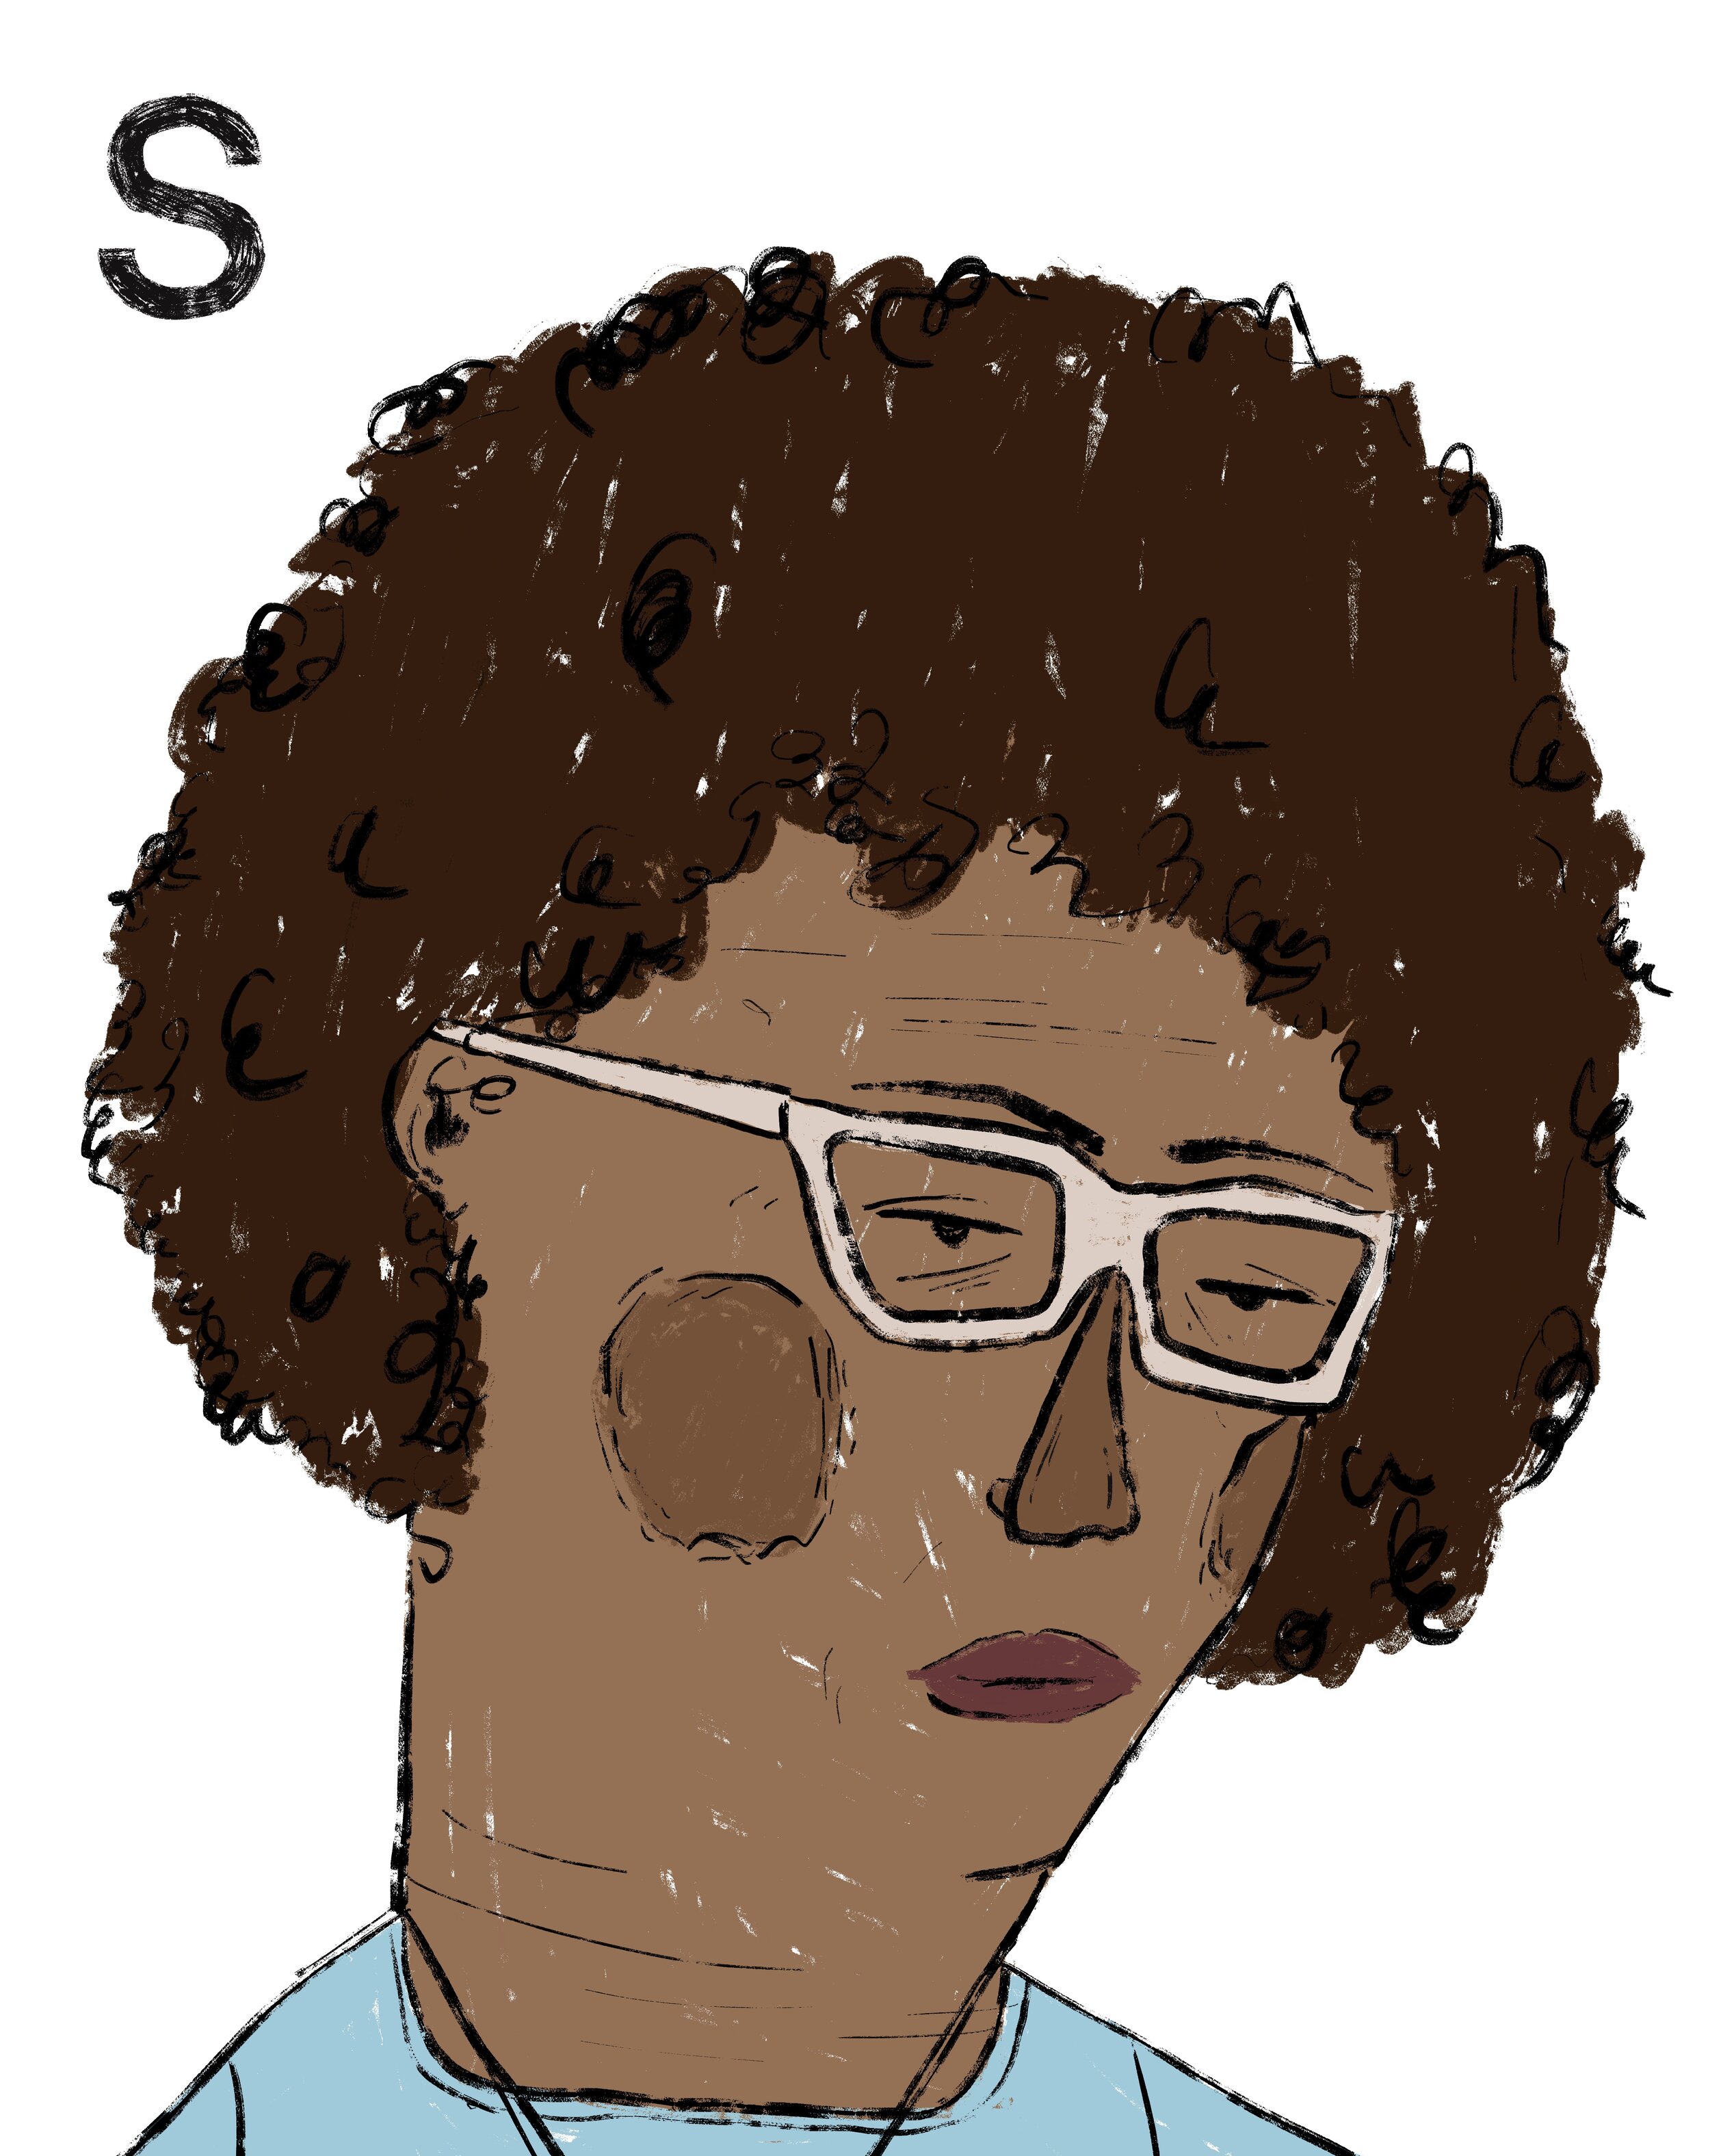 S is for Amy Sherald